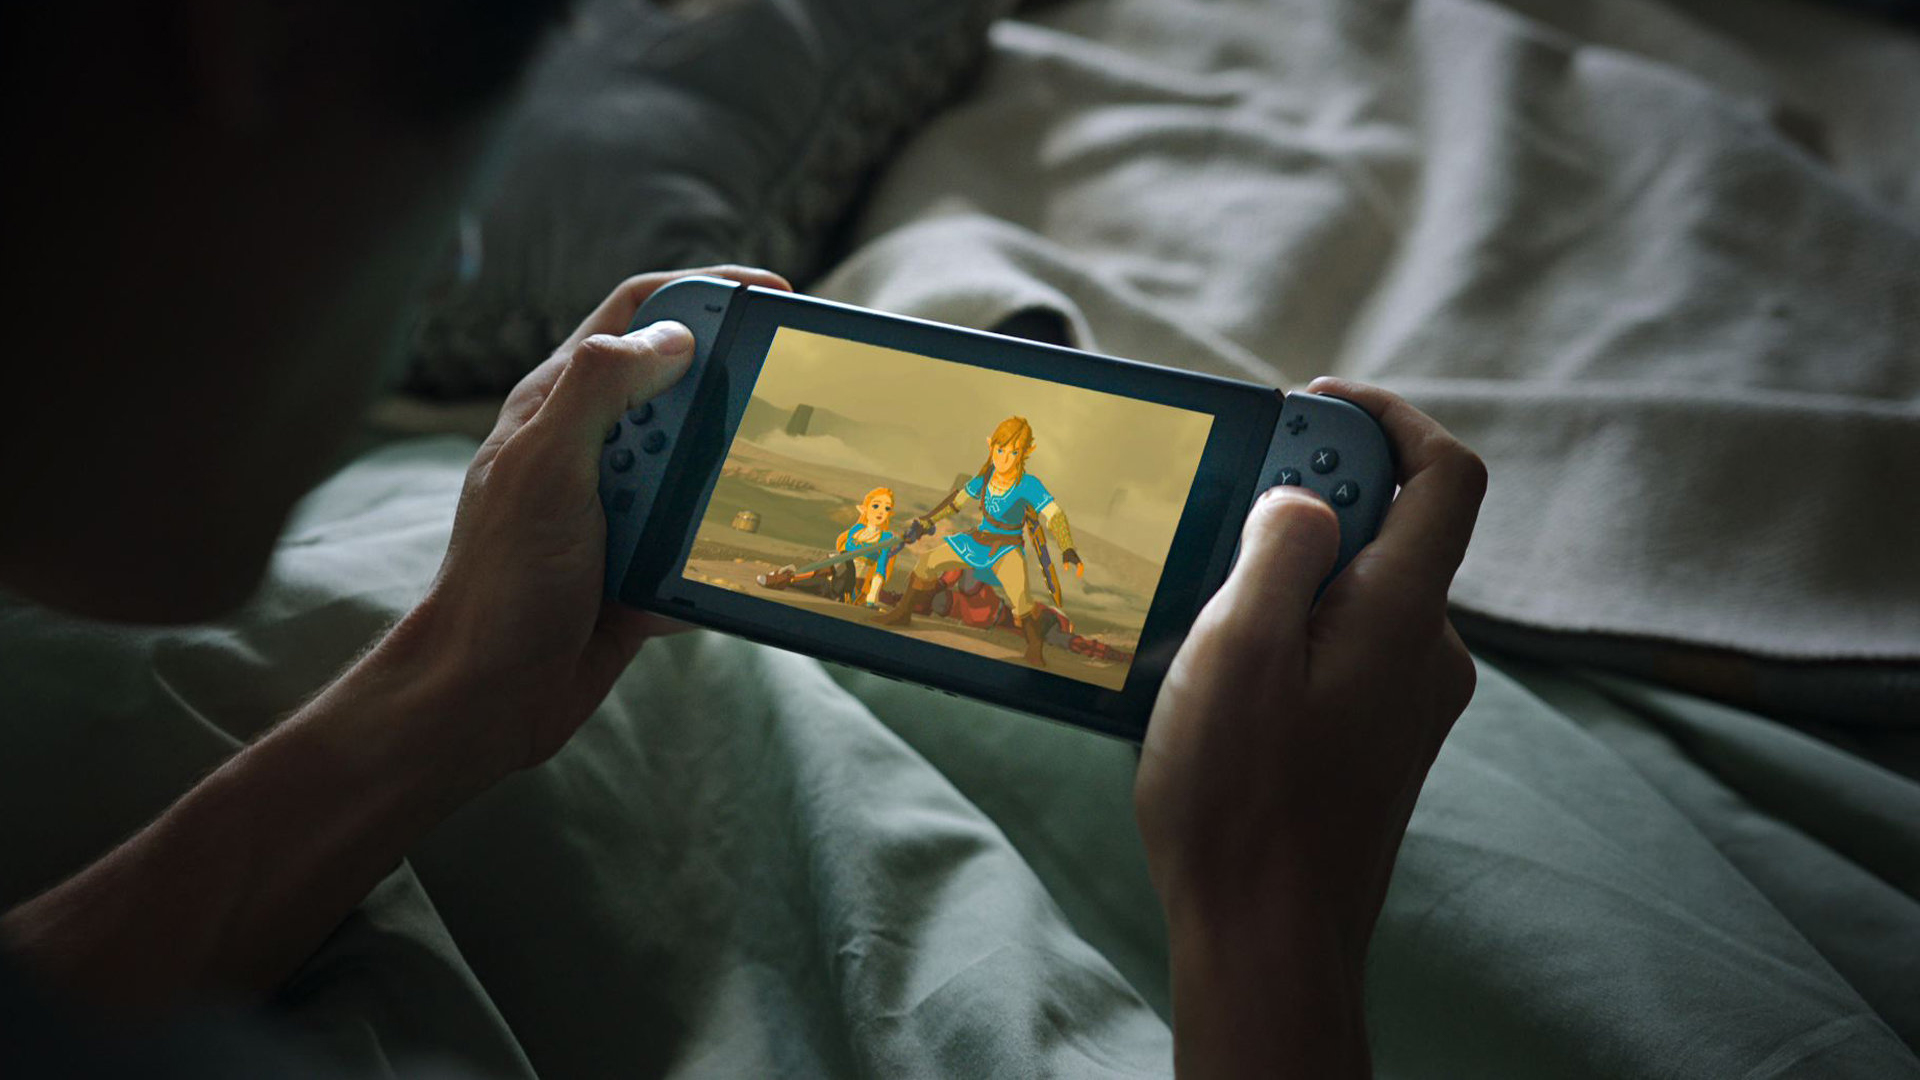 Next Gen Nintendo Switch Could Use A Samsung Oled Display Sammobile